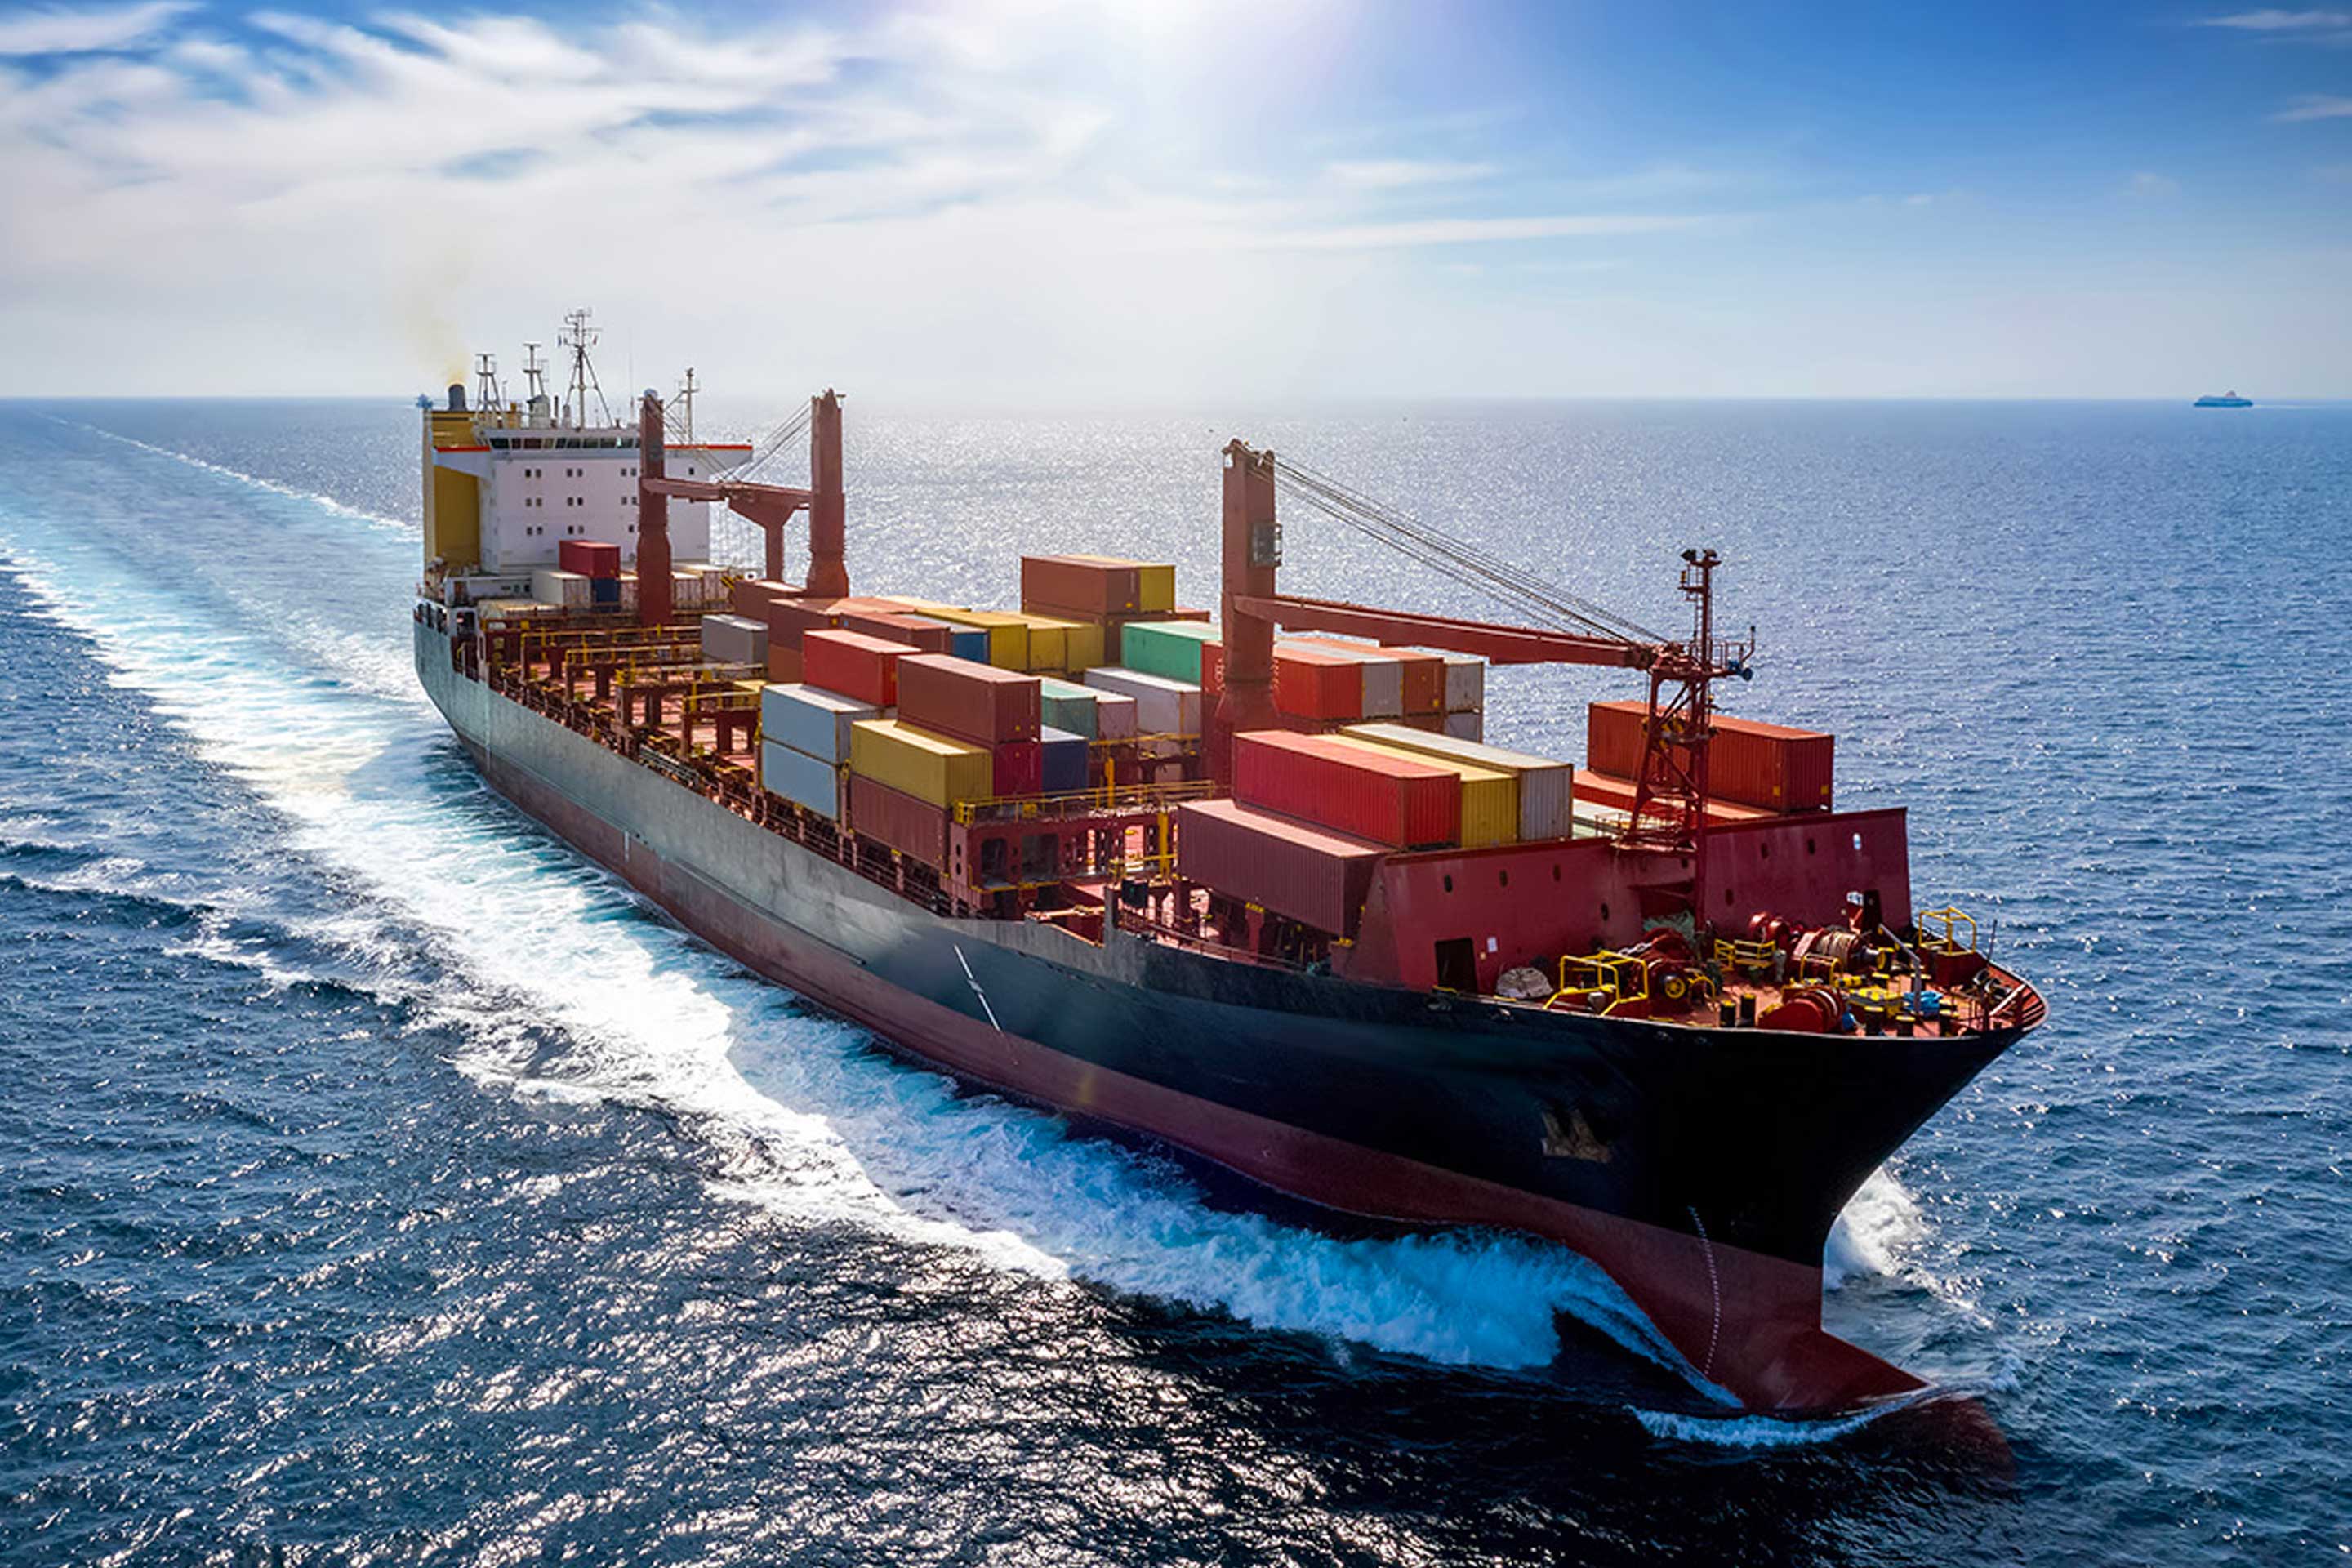 An image of a container ship to highlight the use of synthetic fuels in the shipping industry